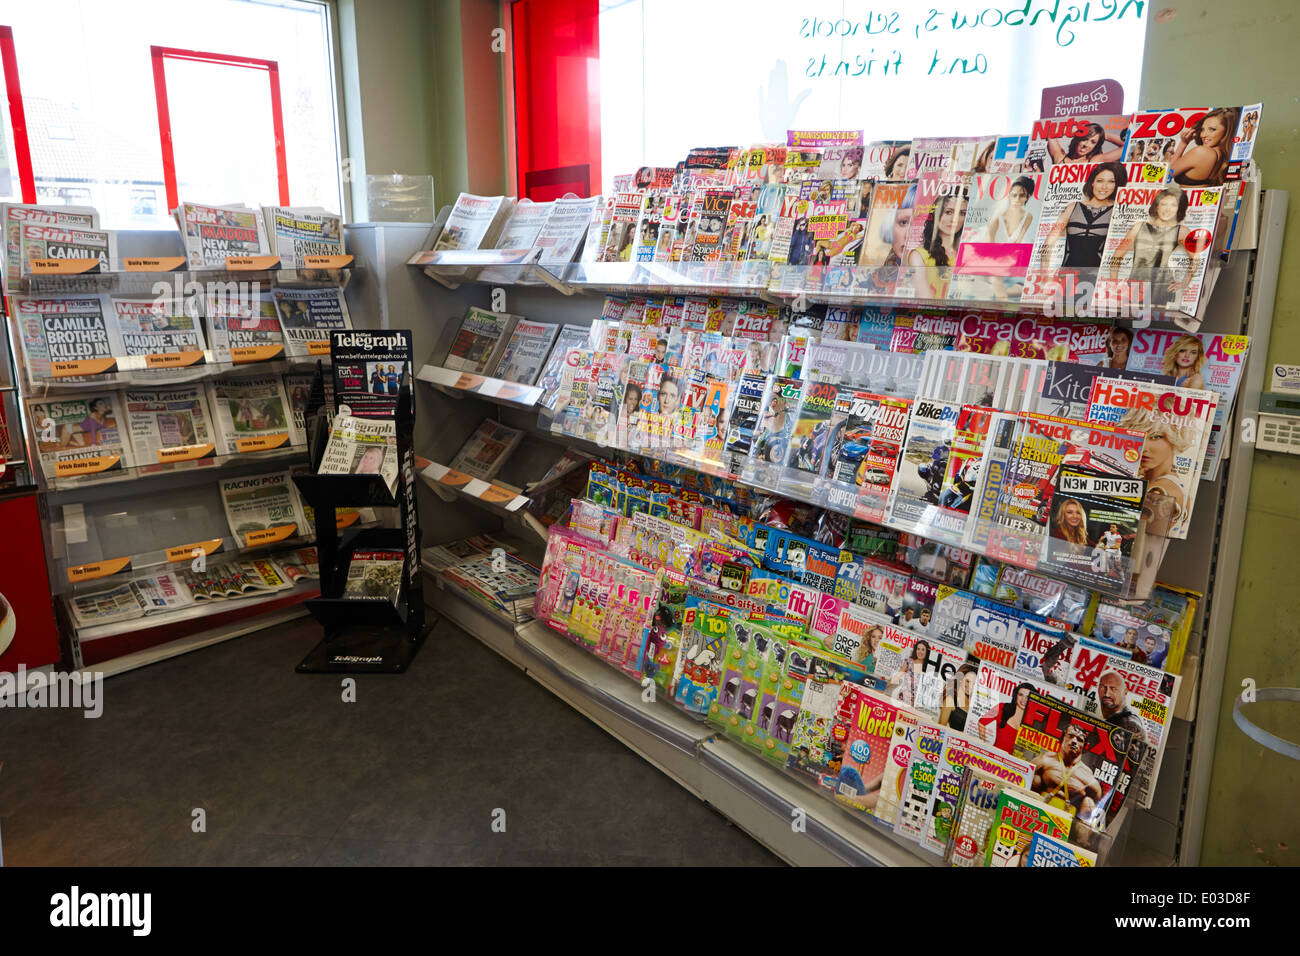 various magazines and newspapers on sale in a filling station convenience store in northern ireland Stock Photo